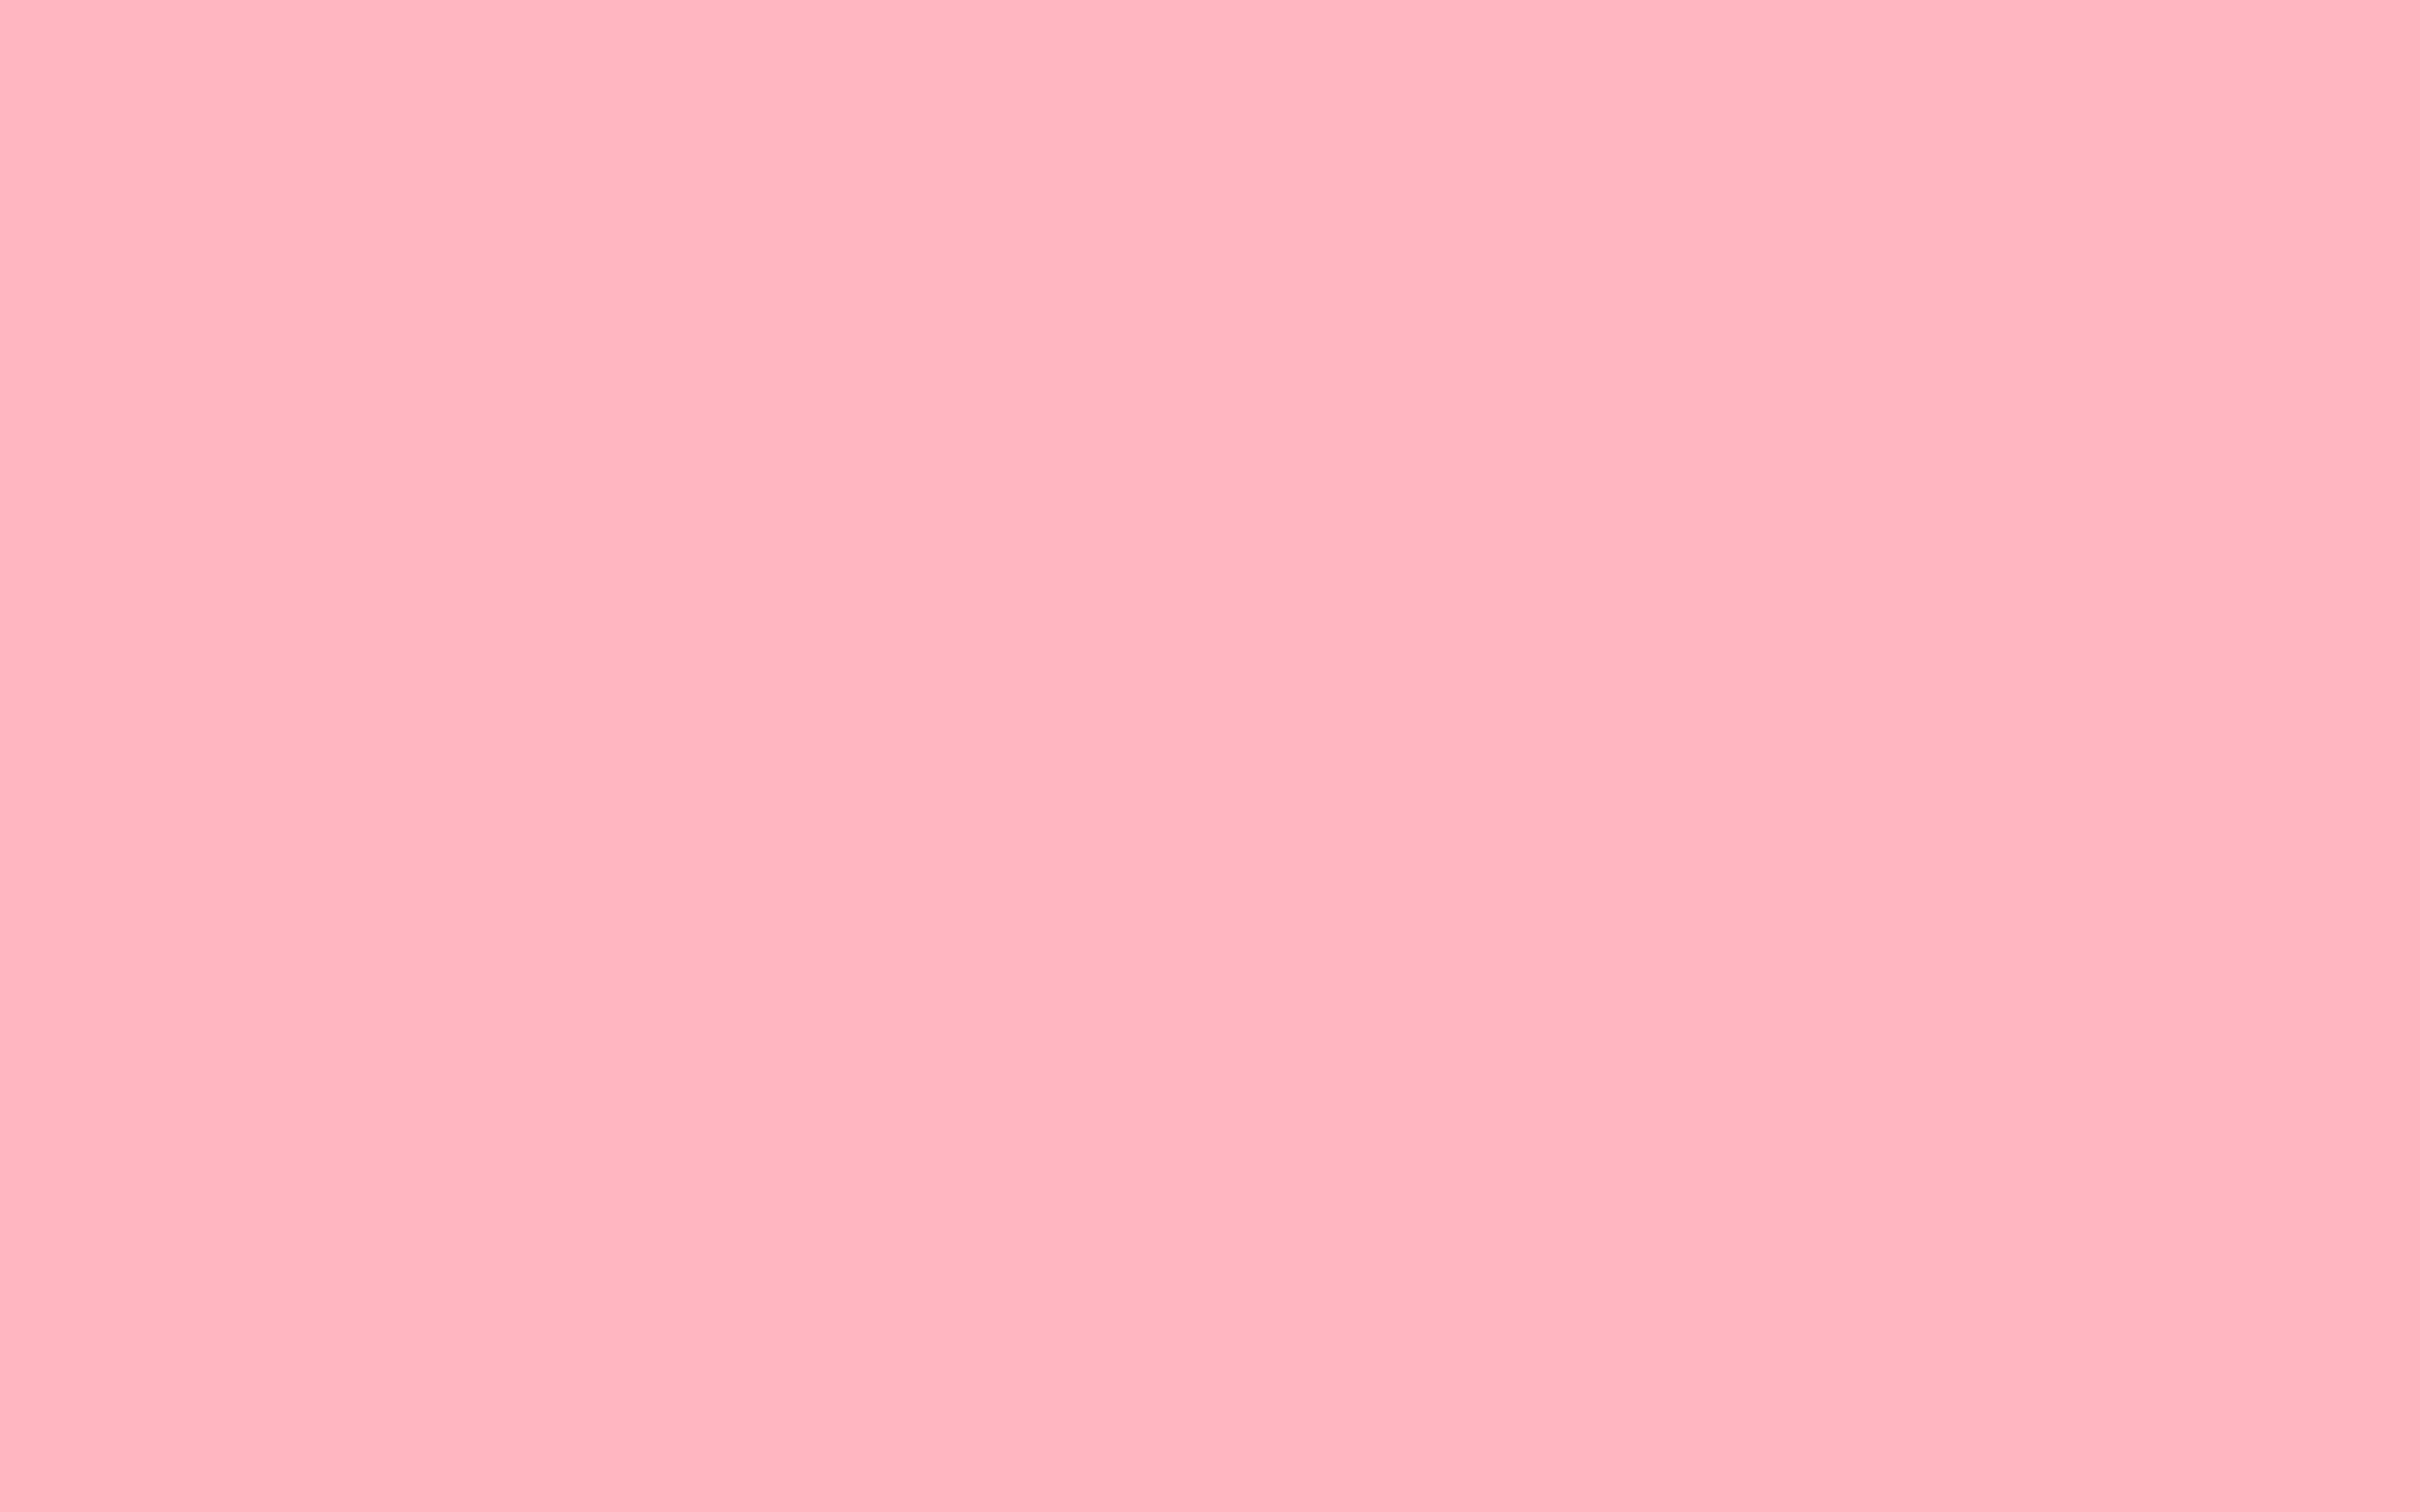 Pink solid color background, view and download the below background